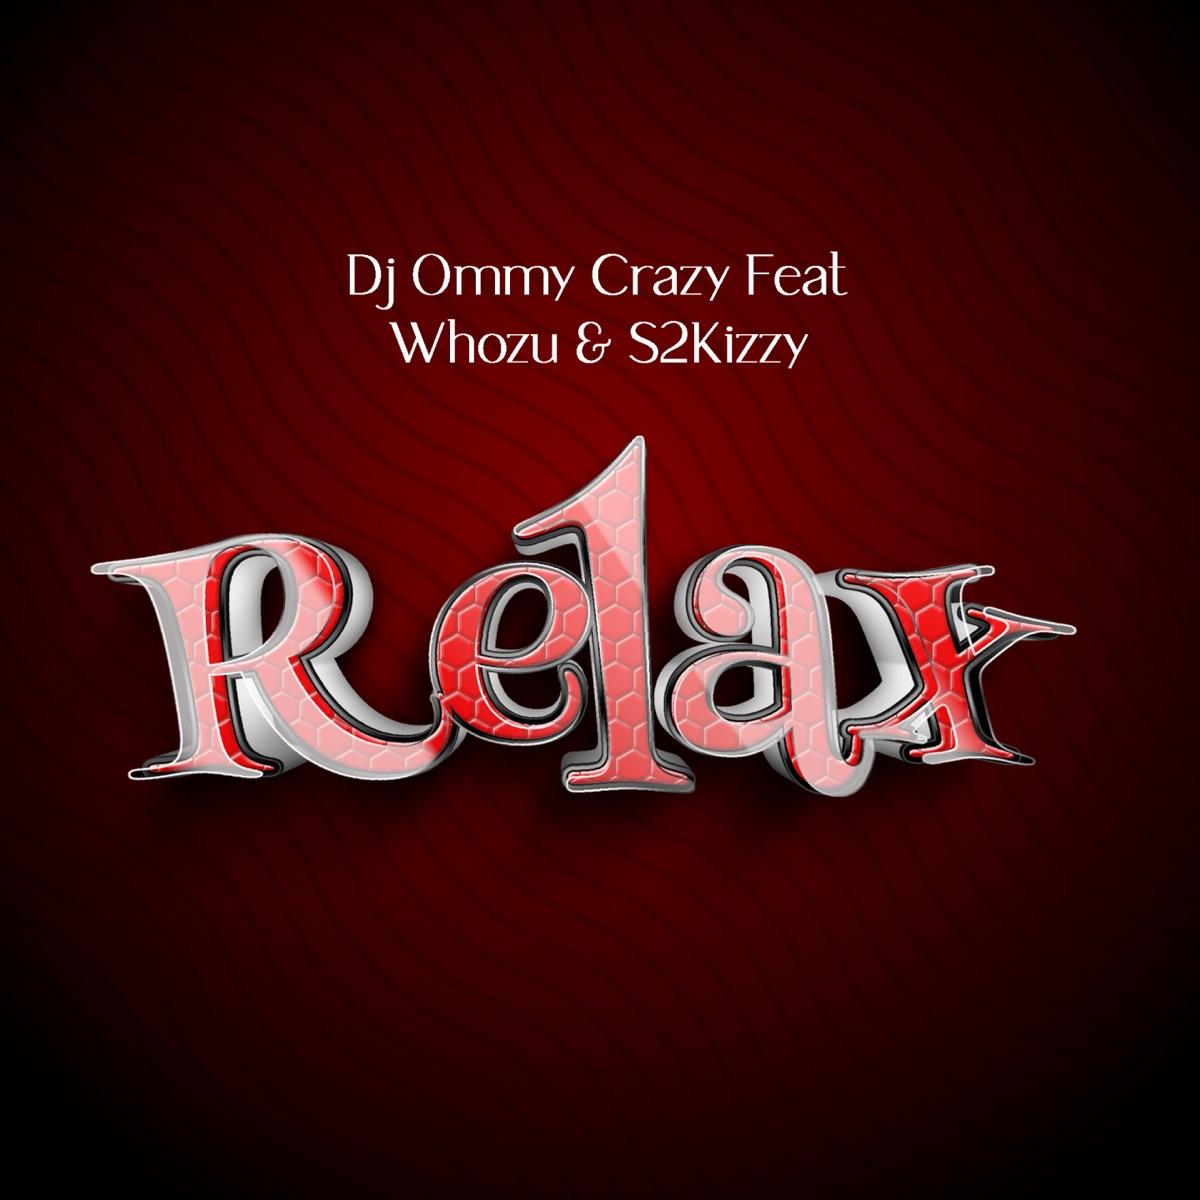 Audio: Dj Ommy Crazy Ft. Whozu & S2kizzy - Relax (Mp3 Download)